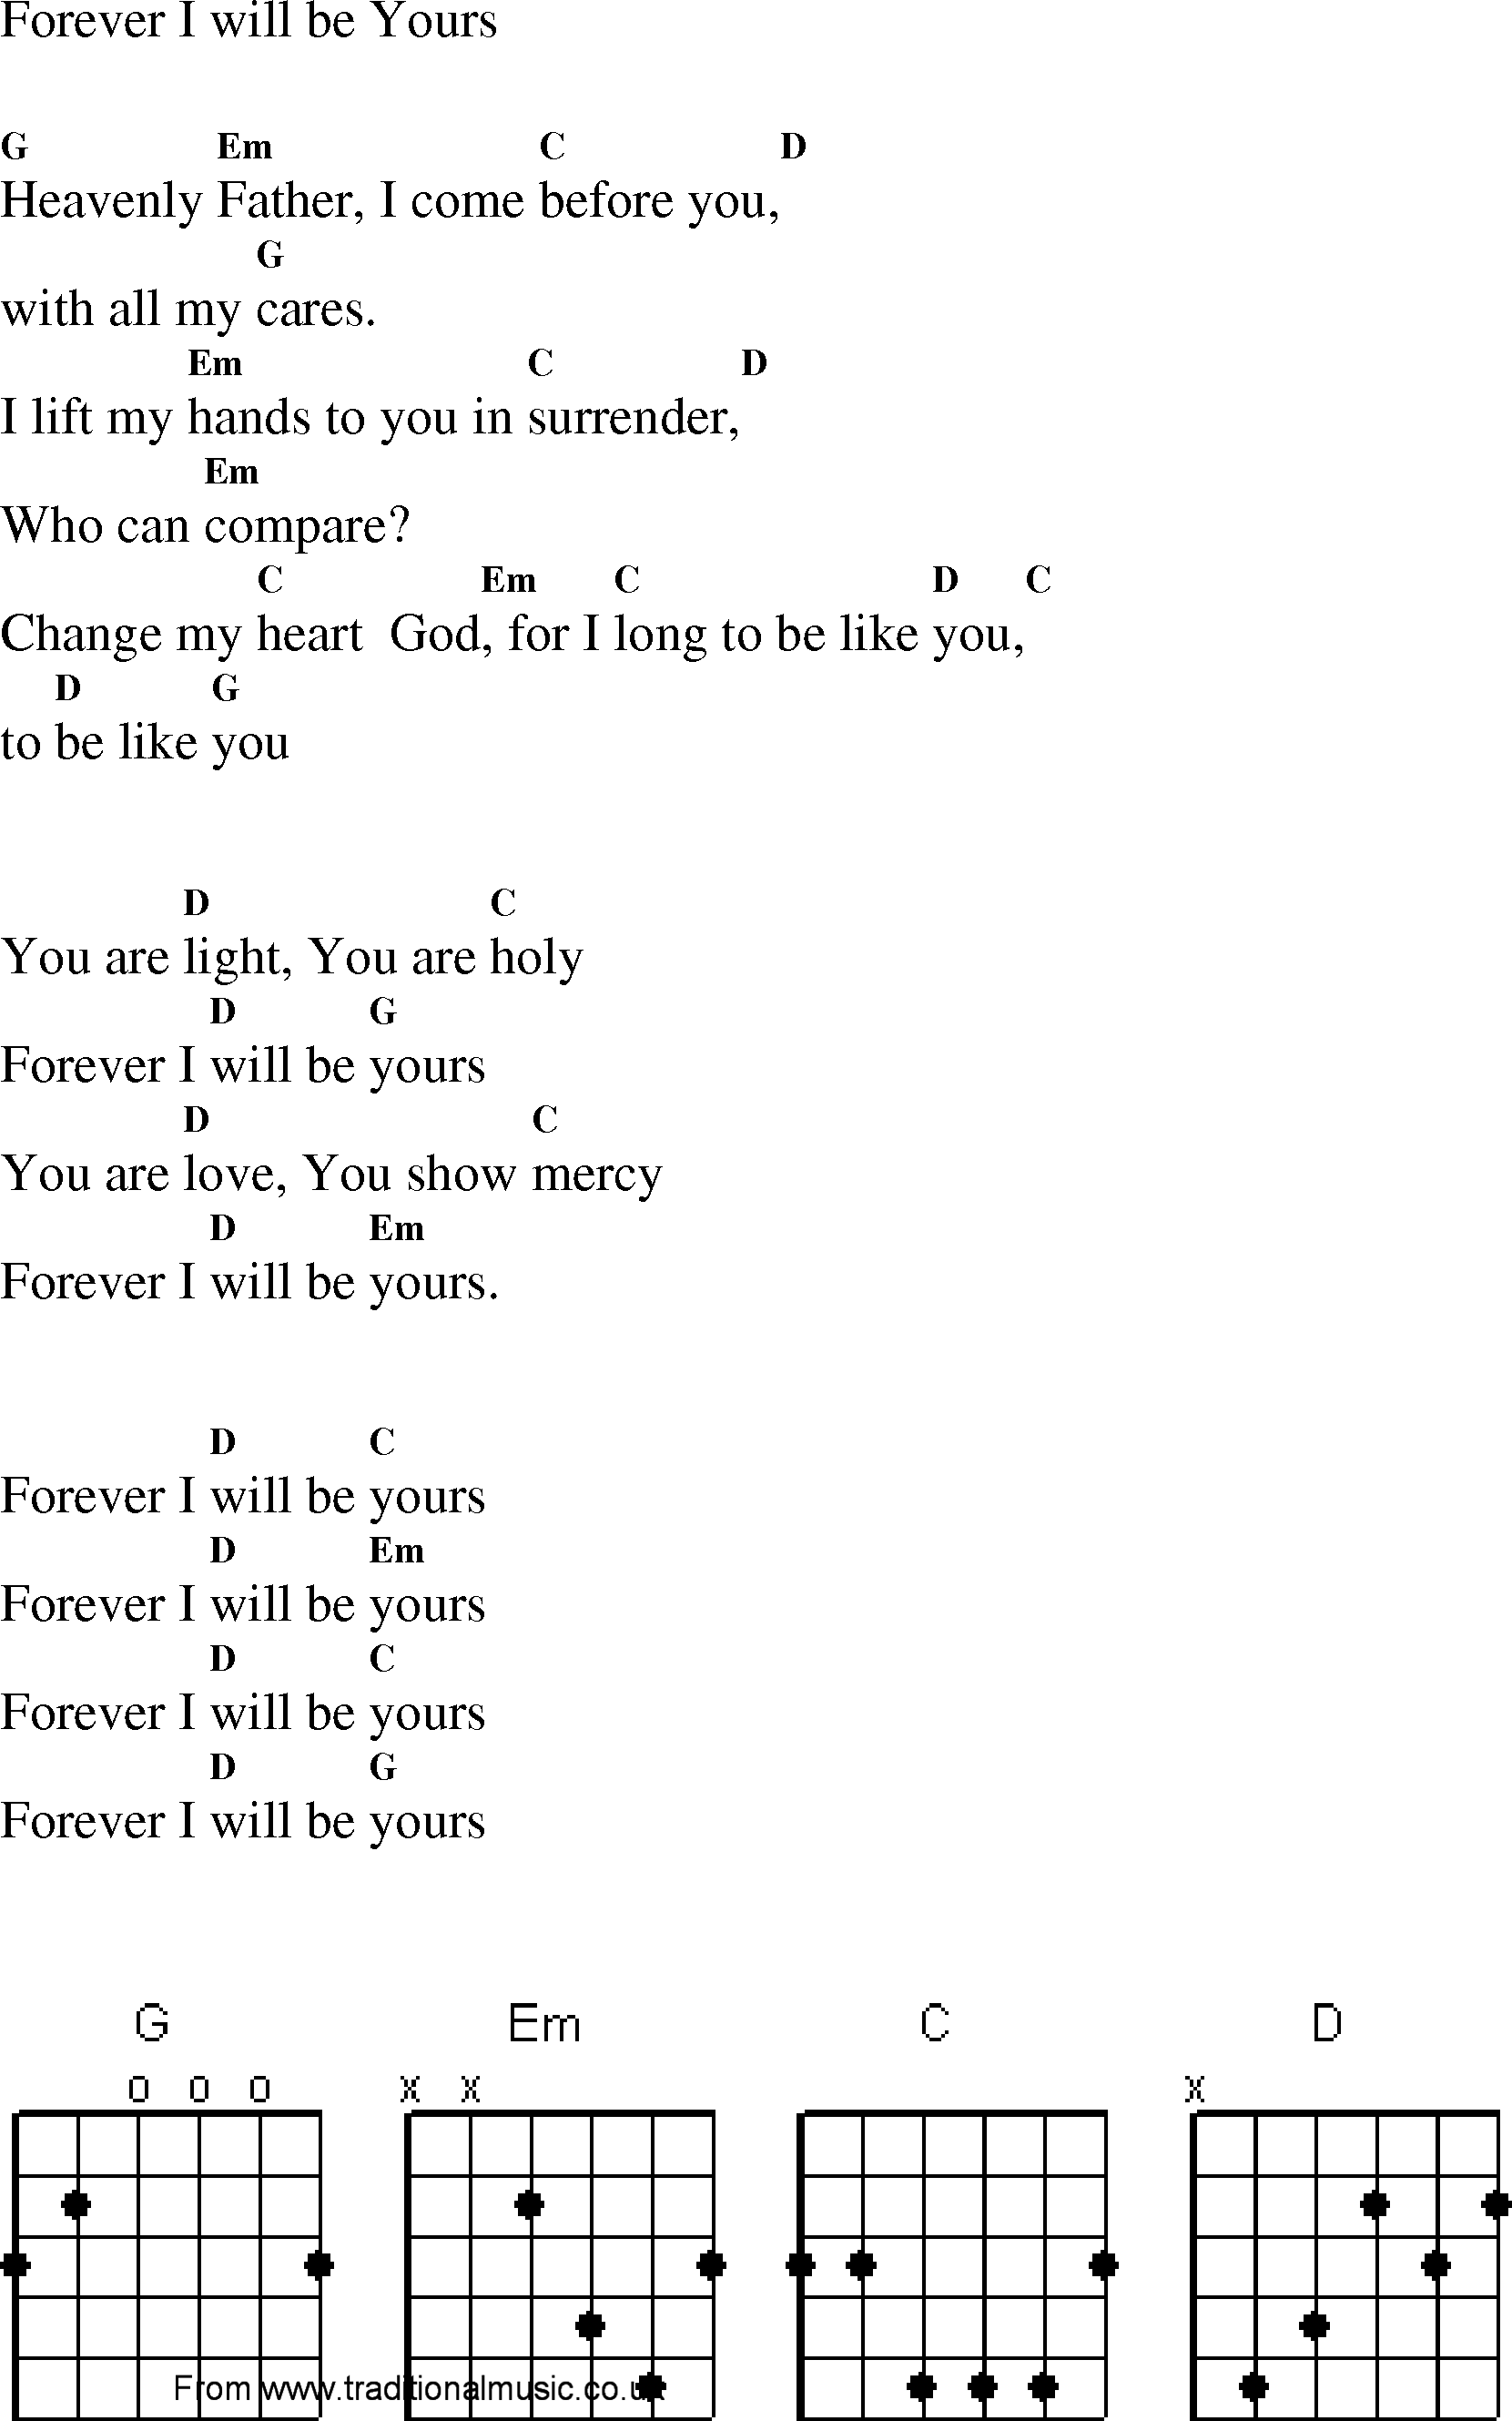 Gospel Song: forever_i_will_be_yours, lyrics and chords.